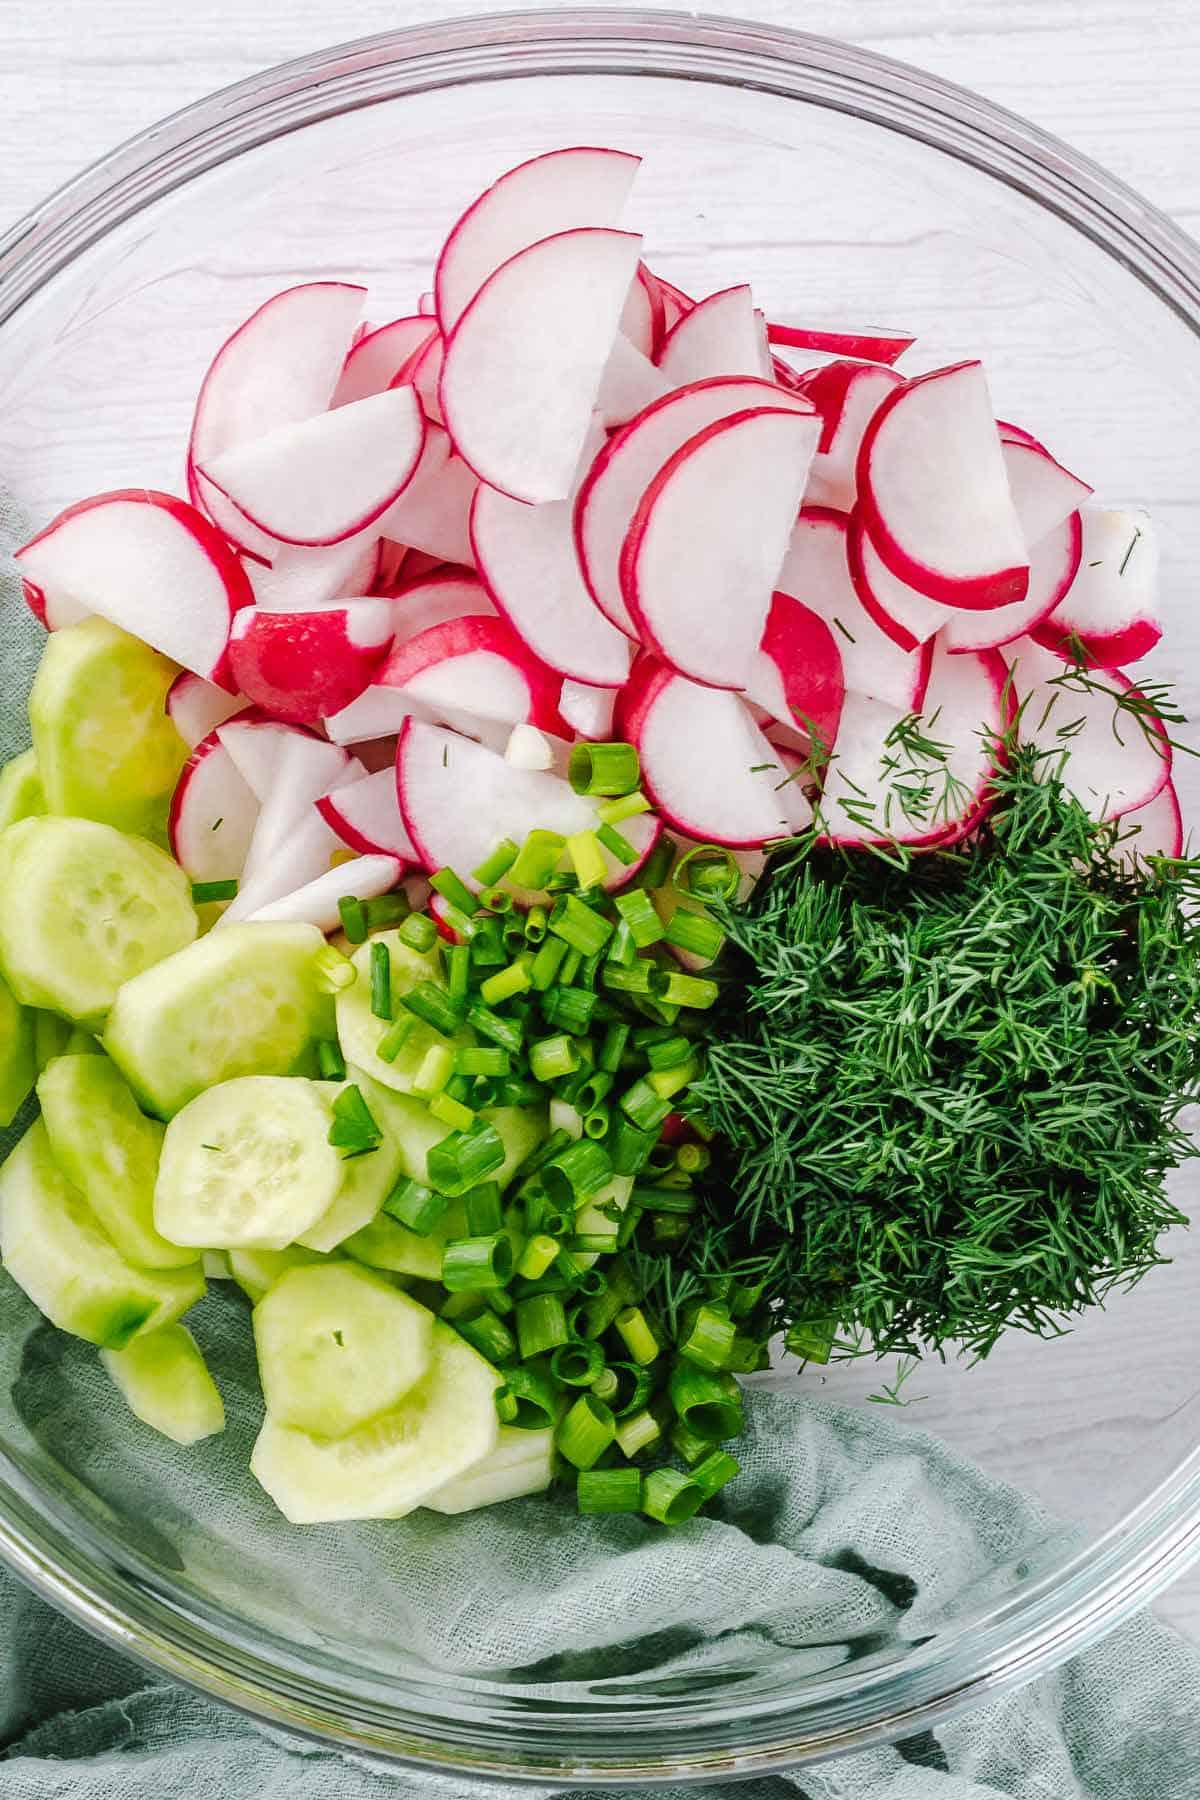 slices radishes cucumbers dill and spring onions in a bowl without dressing